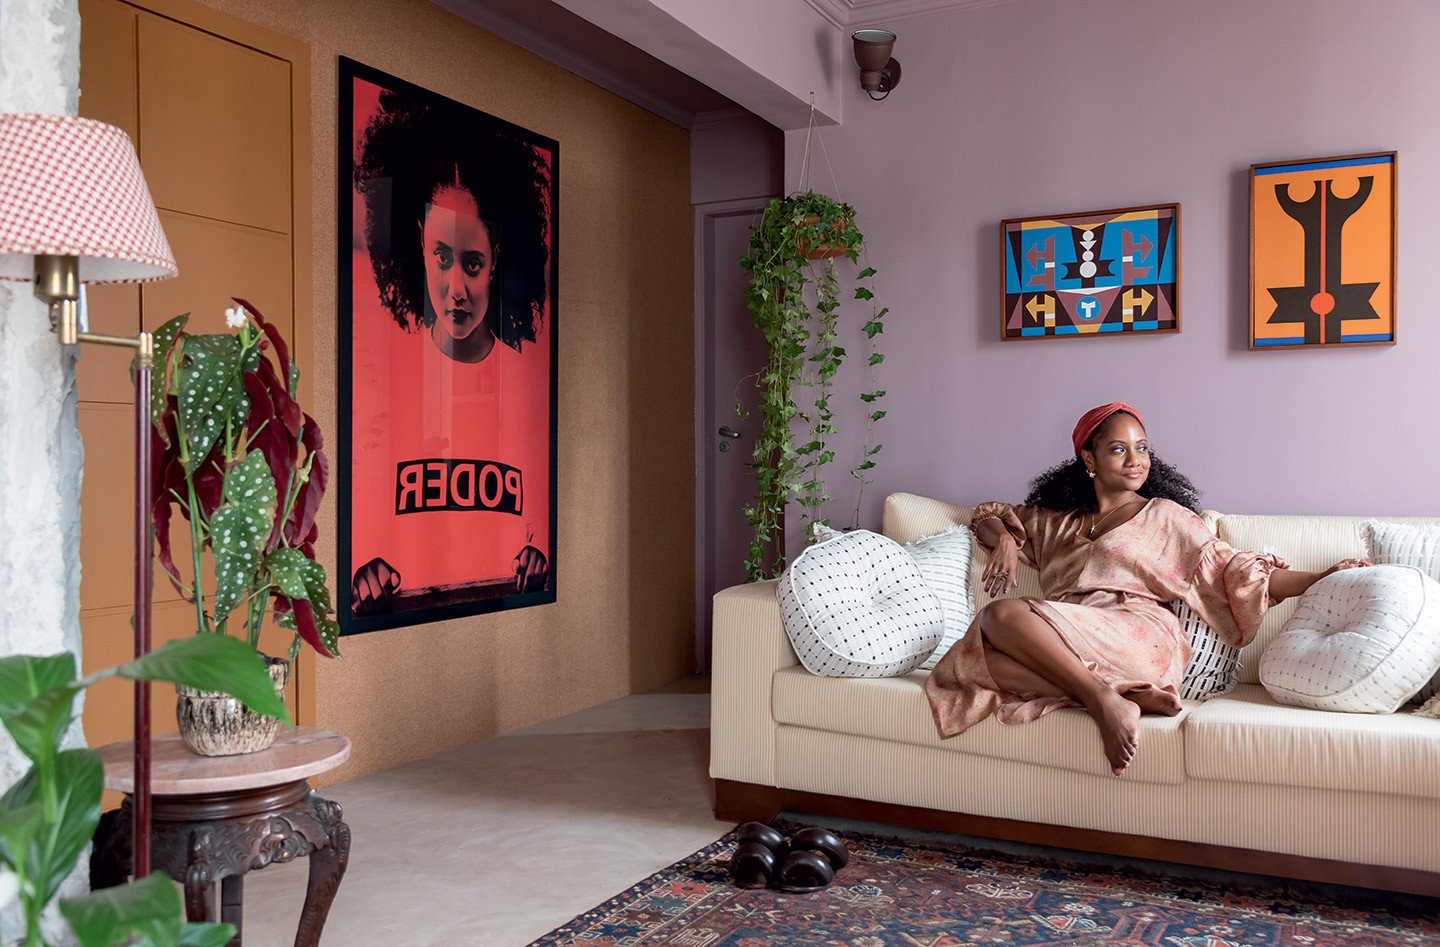 Luiza Brasil opens her apartment with colorful decor and lots of personality (Photo: Wesley Diego Emes)